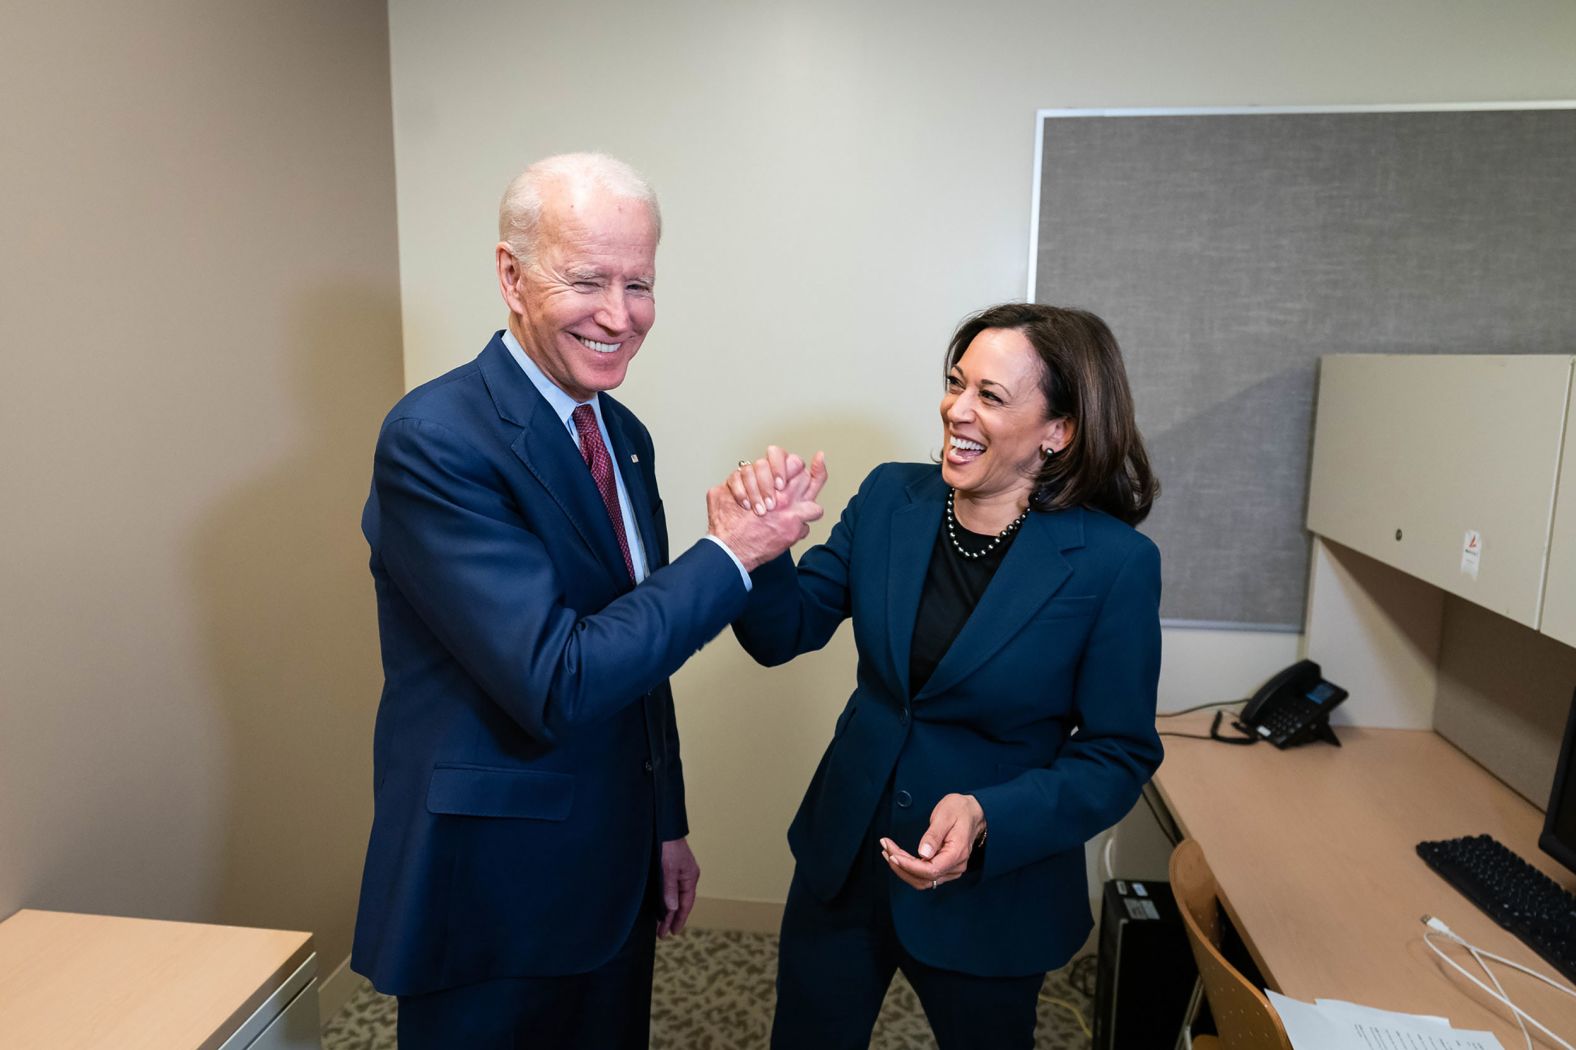 Harris and Biden greet each other at a Detroit high school as they attend a "Get Out the Vote" event in March 2020. Harris had dropped out of the presidential race a few months earlier.